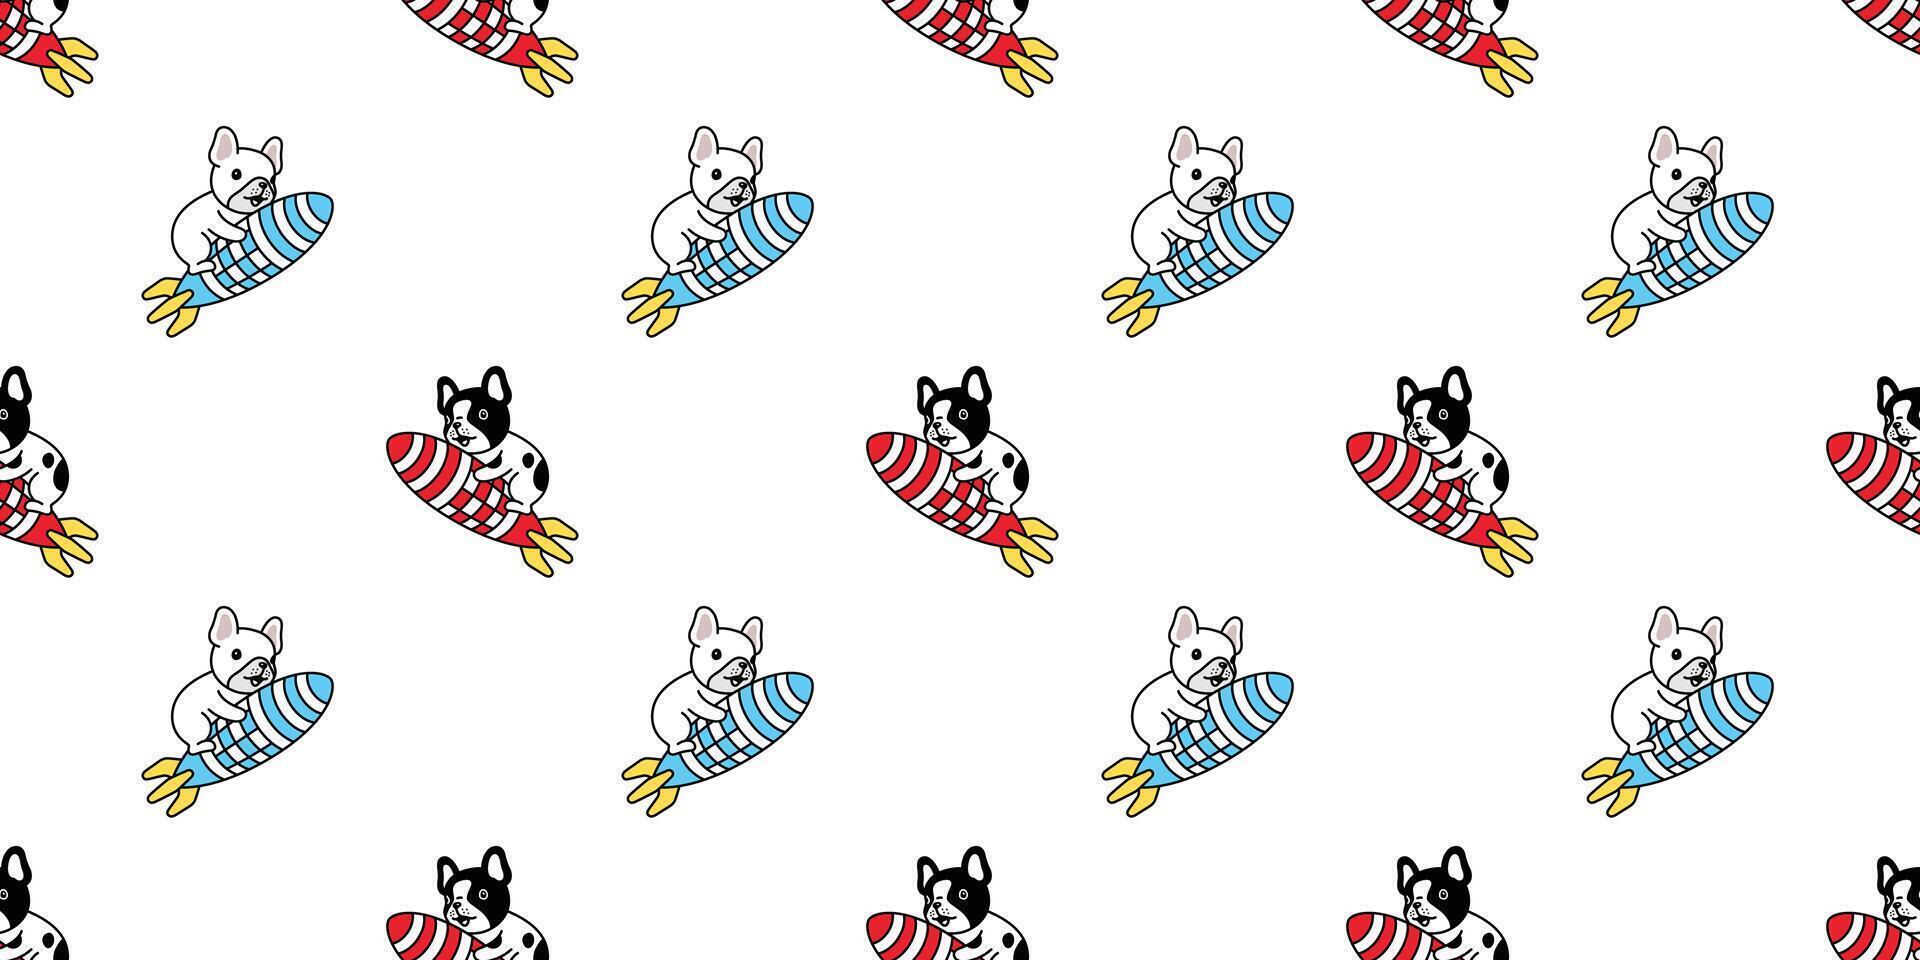 dog seamless pattern french bulldog vector space rocket bomb pet puppy animal scarf isolated repeat wallpaper tile background cartoon doodle illustration design